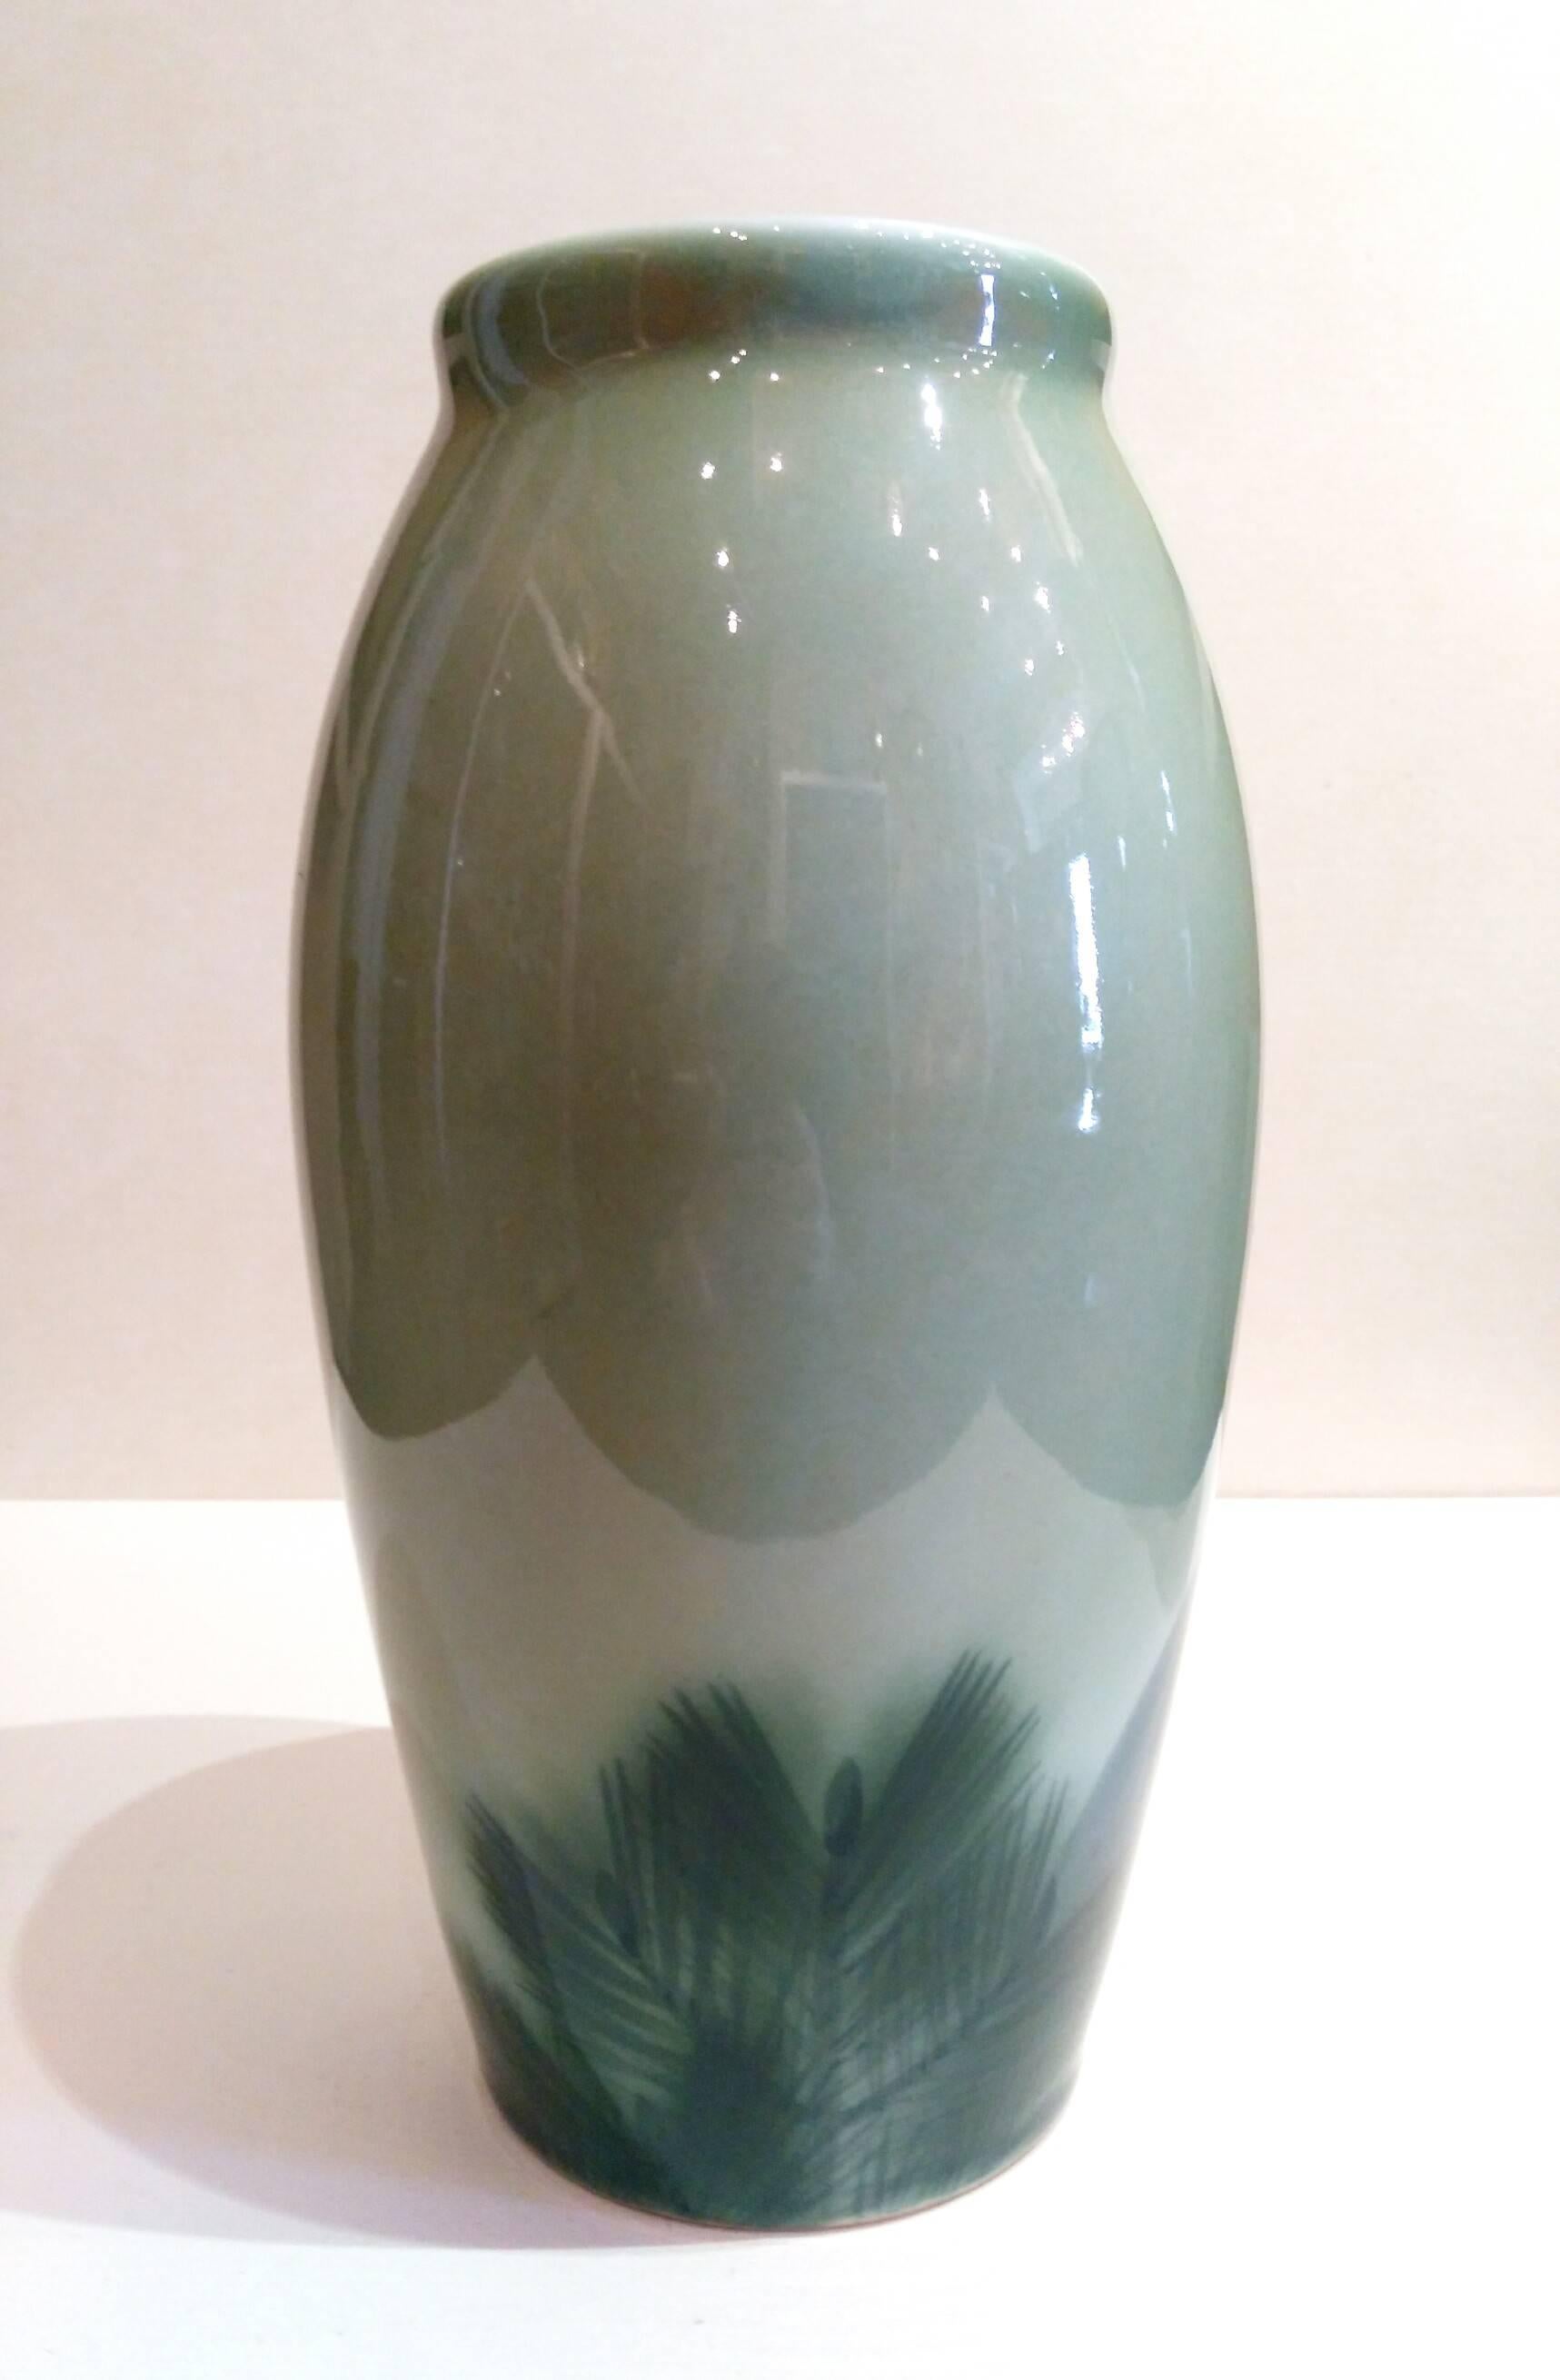 A vase depicting a Manchurian crane and a pine on a celadon background by Nishiura Enji.